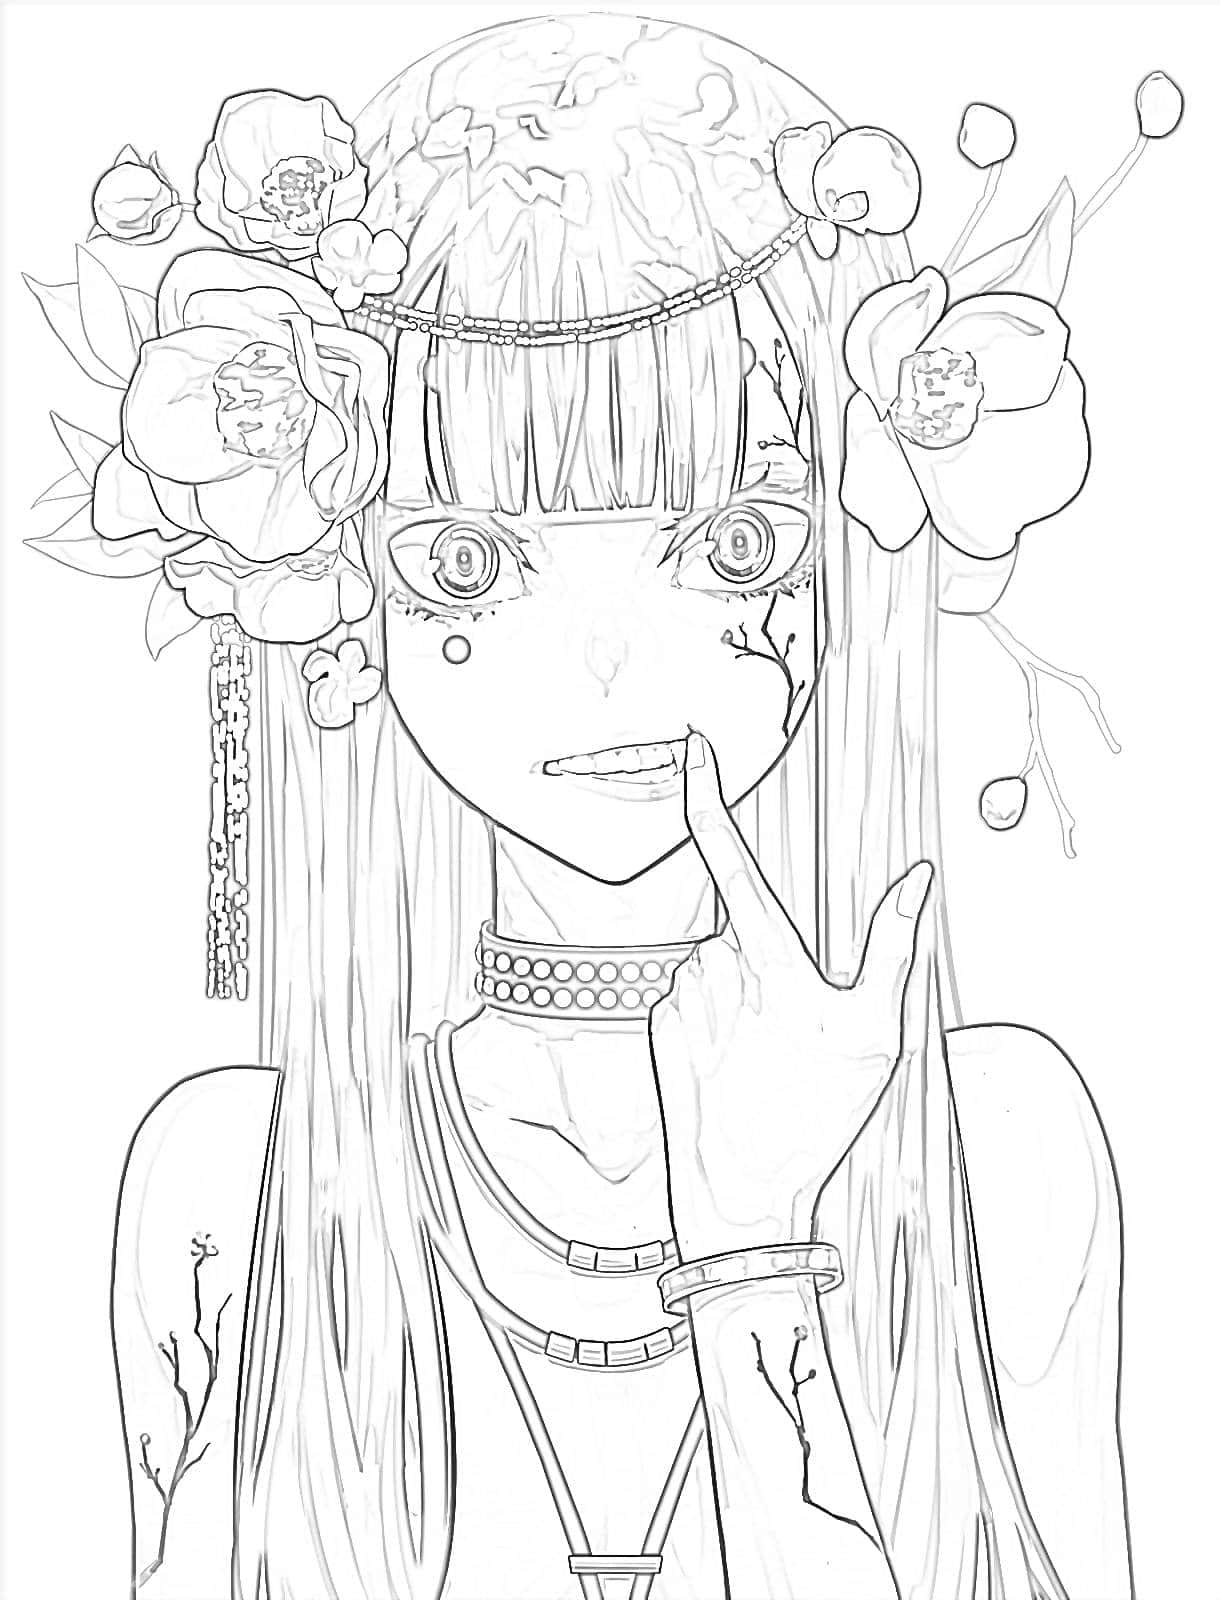 Get This Long Hair Anime Girl Coloring Pages lh86 !